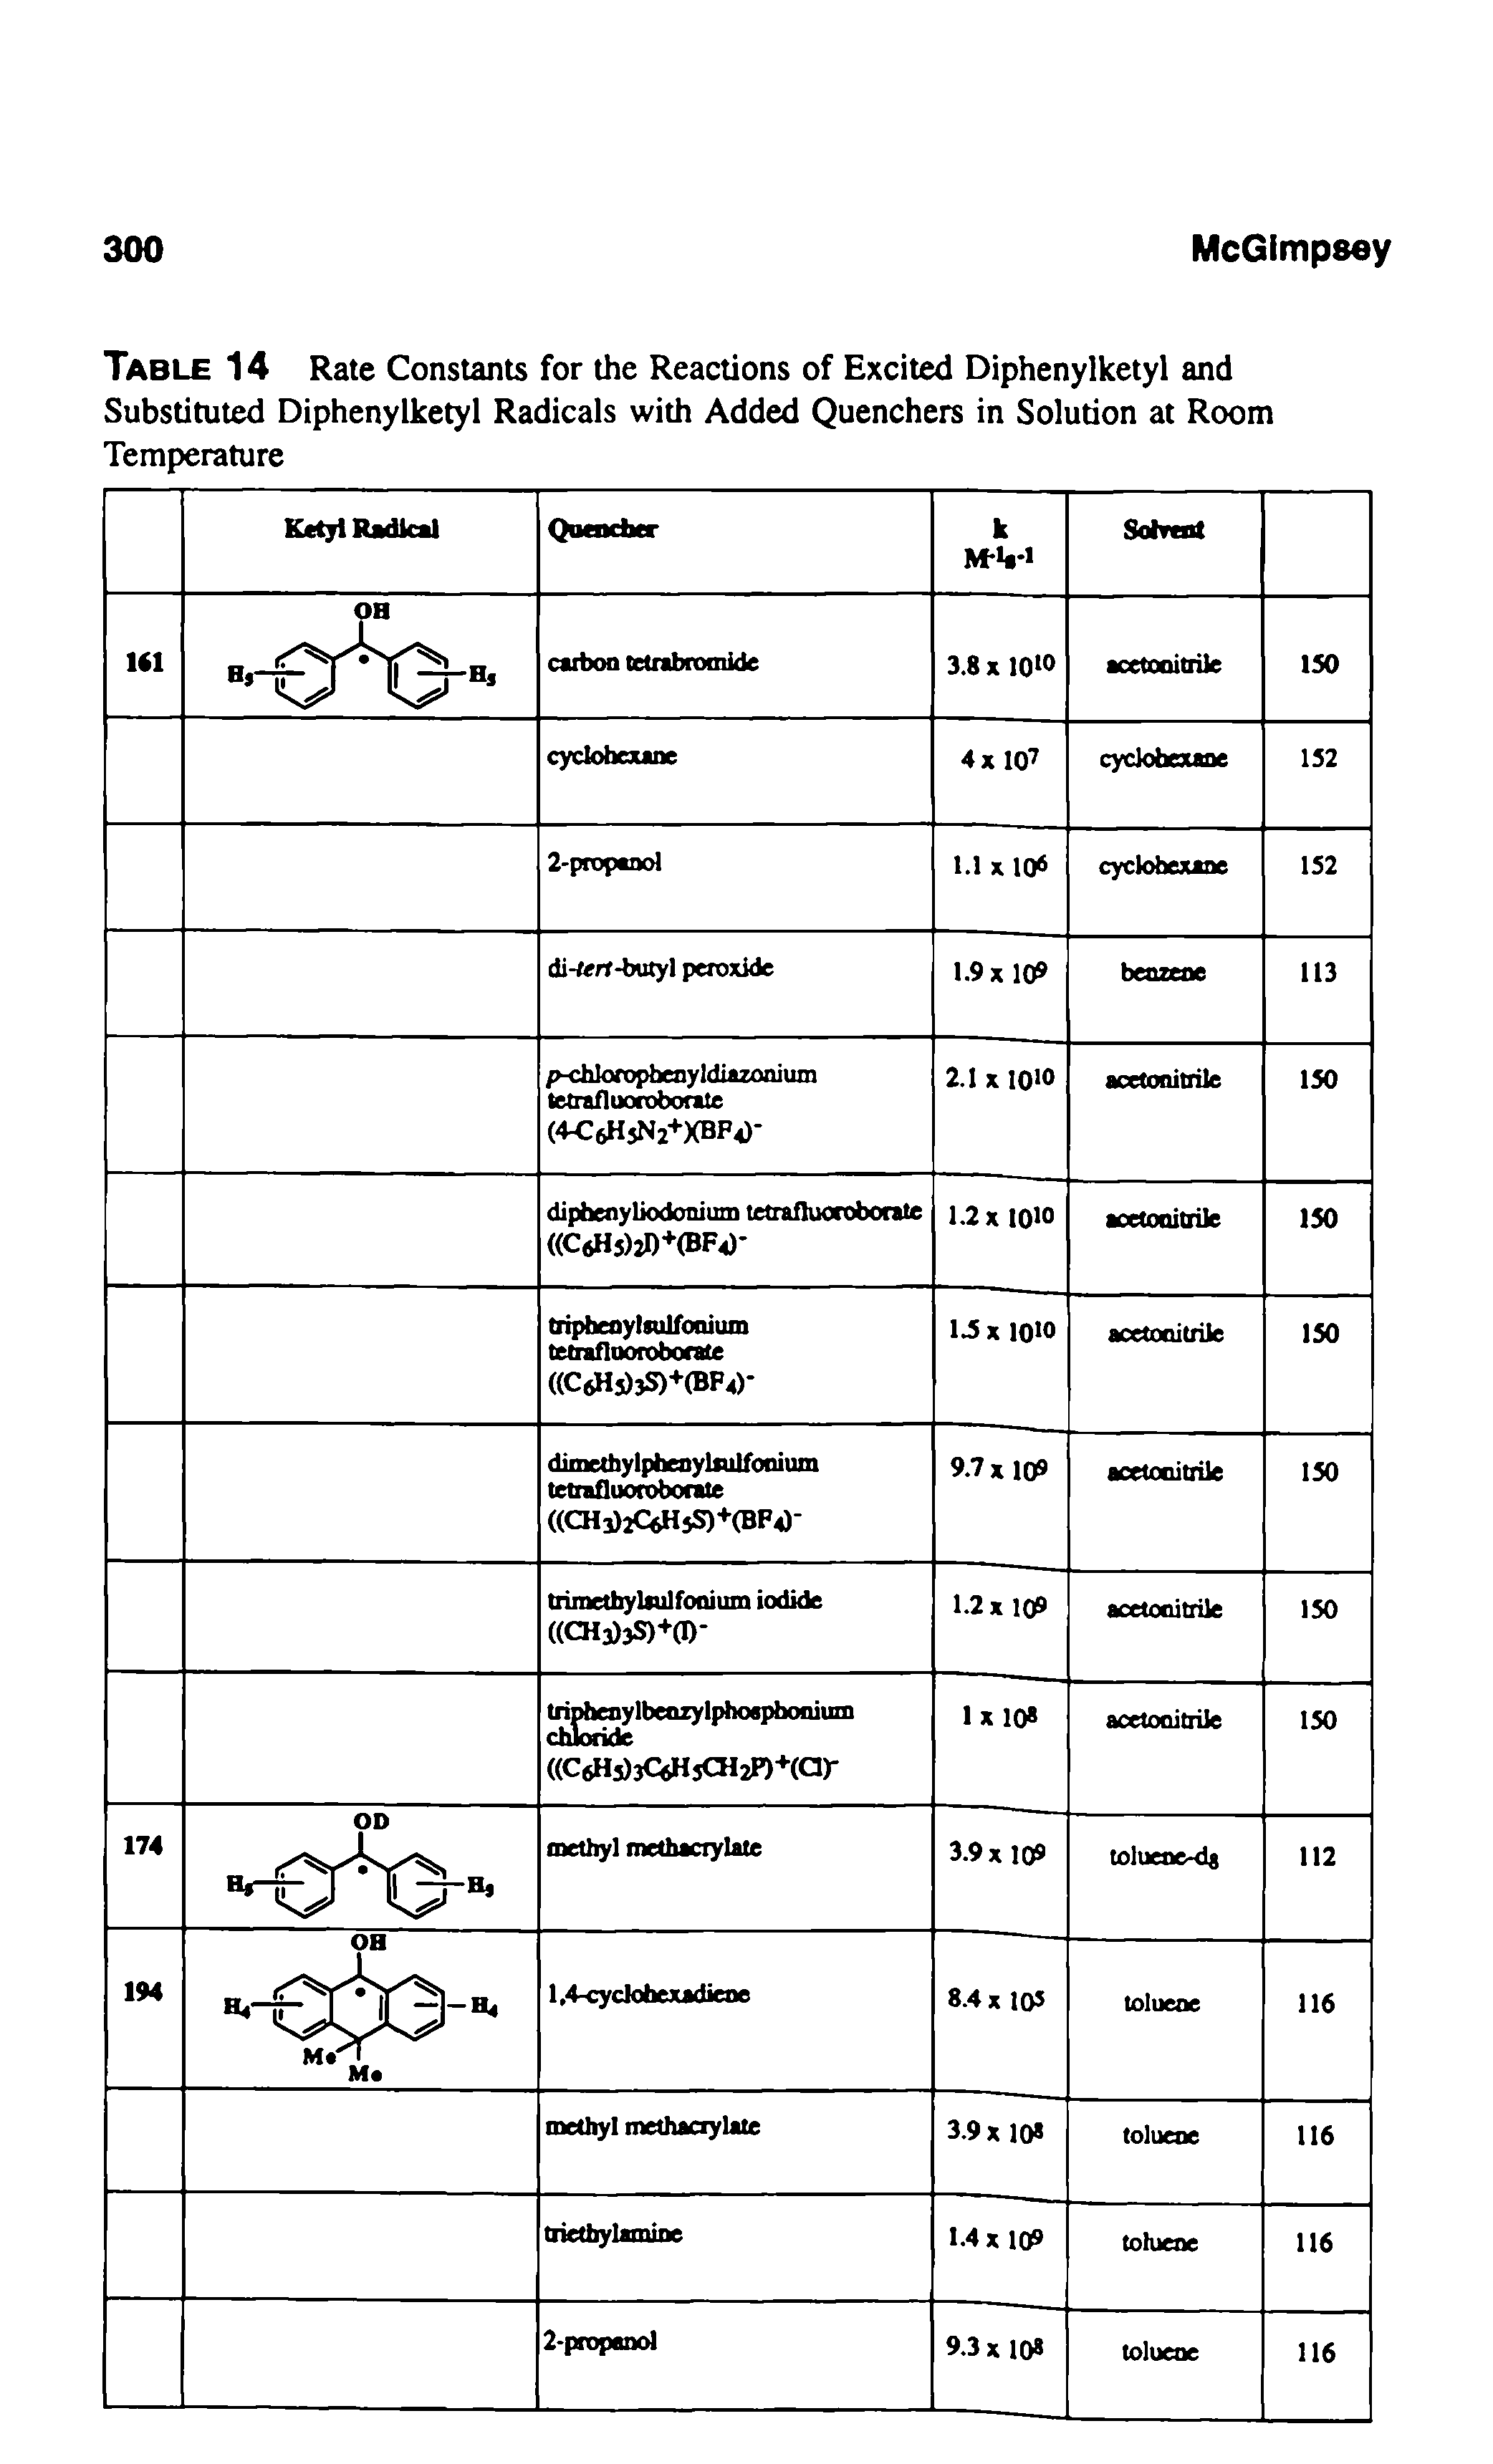 Table 14 Rate Constants for the Reactions of Excited Diphenylketyl and Substituted Diphenylketyl Radicals with Added Quenchers in Solution at Room...